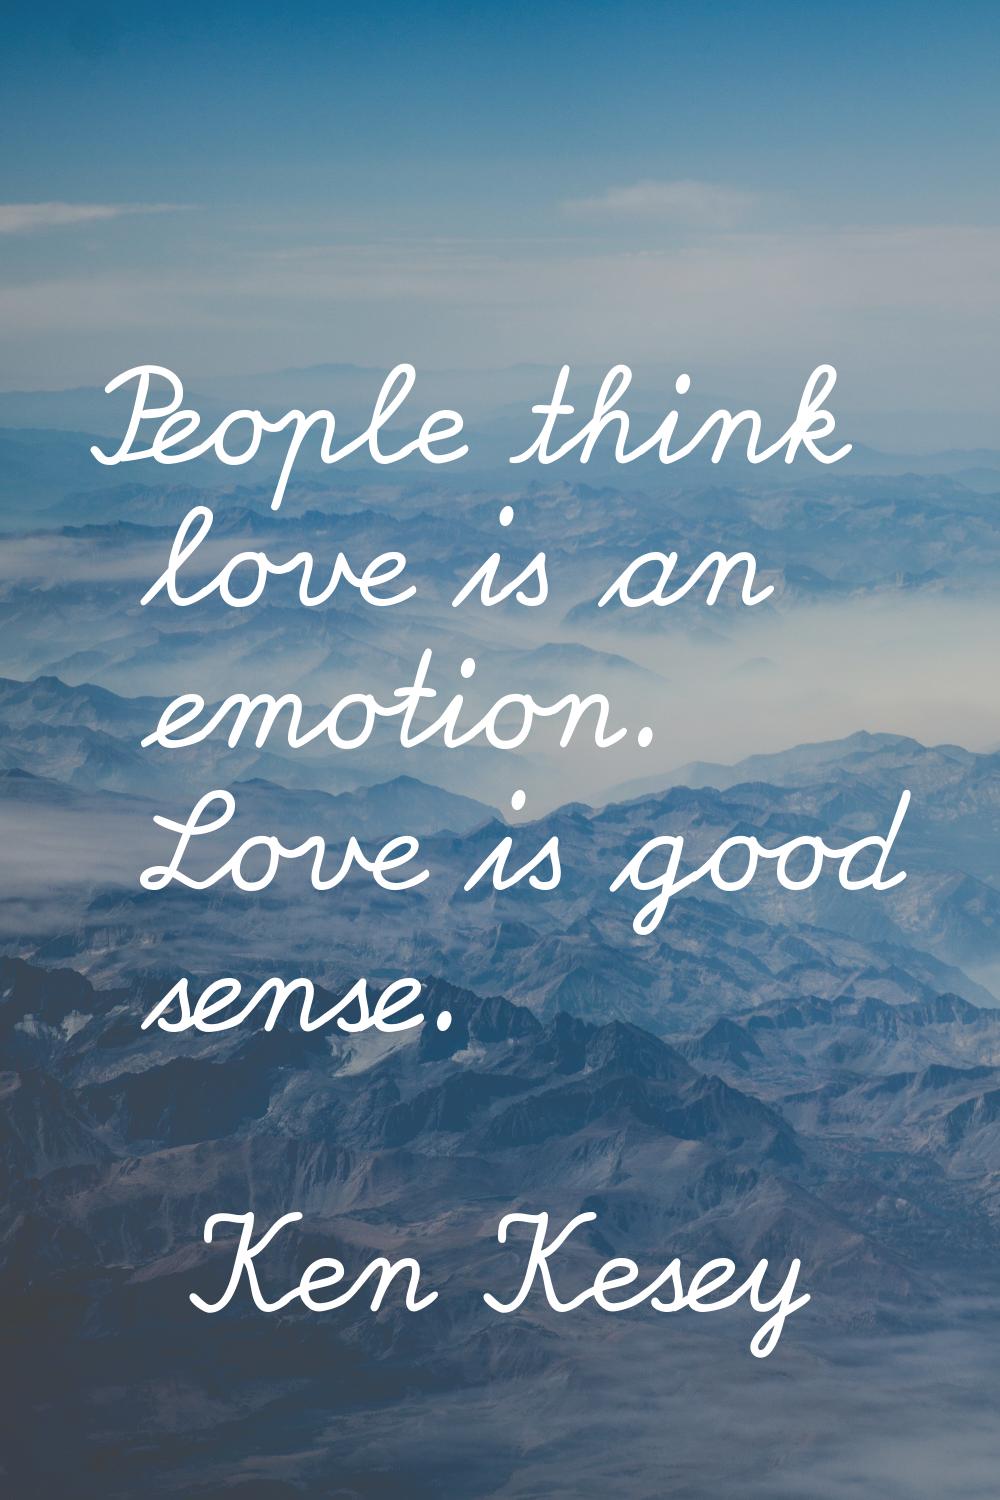 People think love is an emotion. Love is good sense.